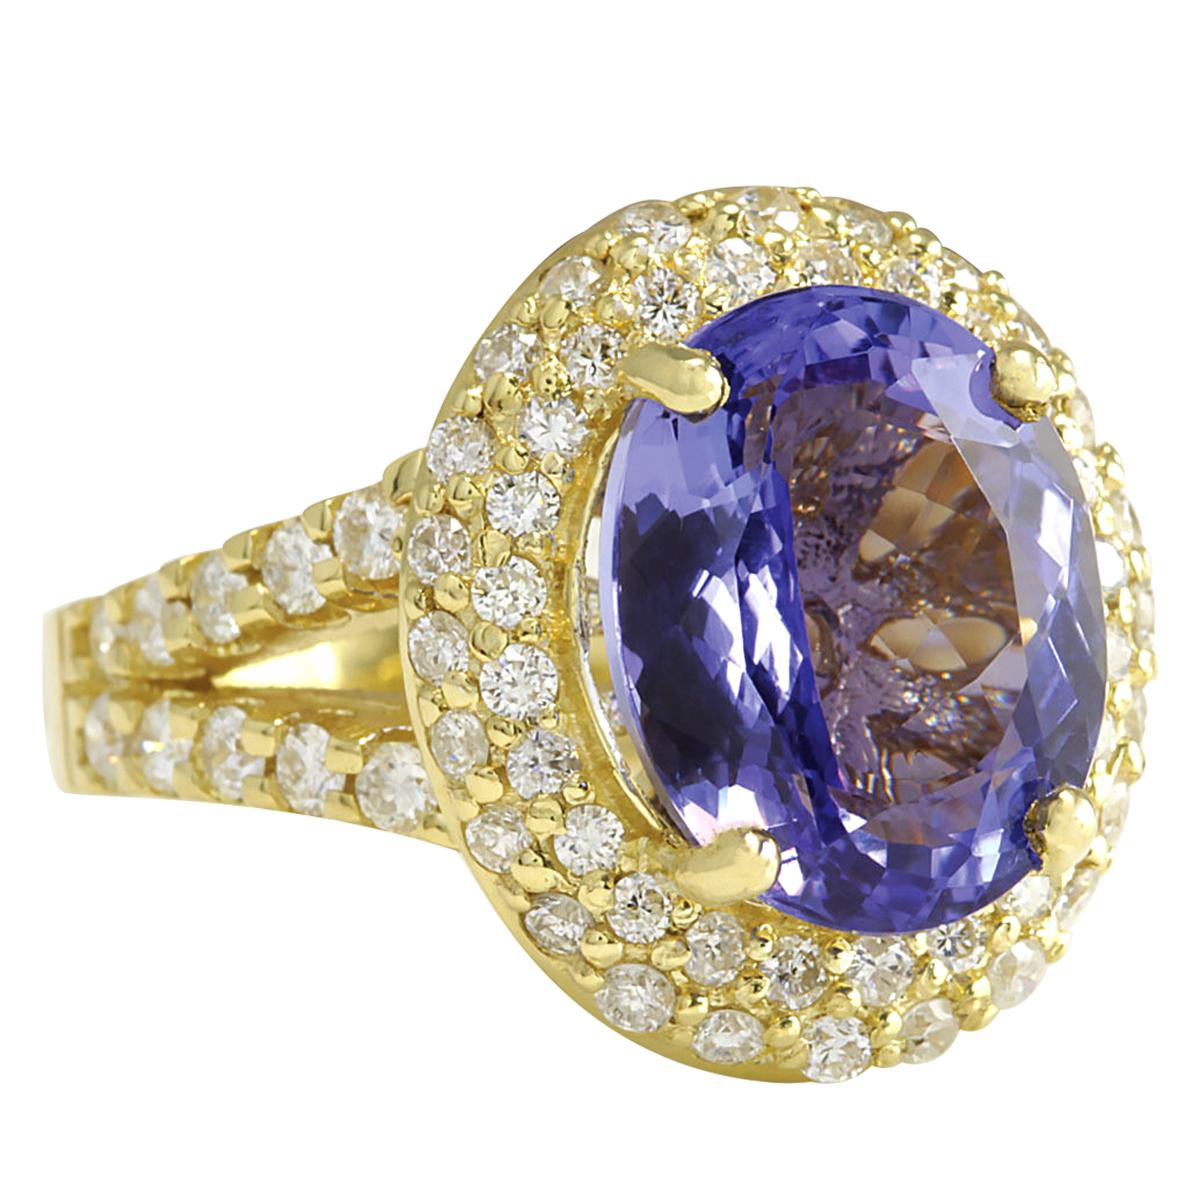 Introducing our exquisite 14K Yellow Gold Diamond Ring featuring a stunning 8.54 Carat Natural Tanzanite. Stamped for authenticity, this ring is a symbol of elegance and sophistication. Weighing 11.5 grams, it boasts a captivating Tanzanite weighing